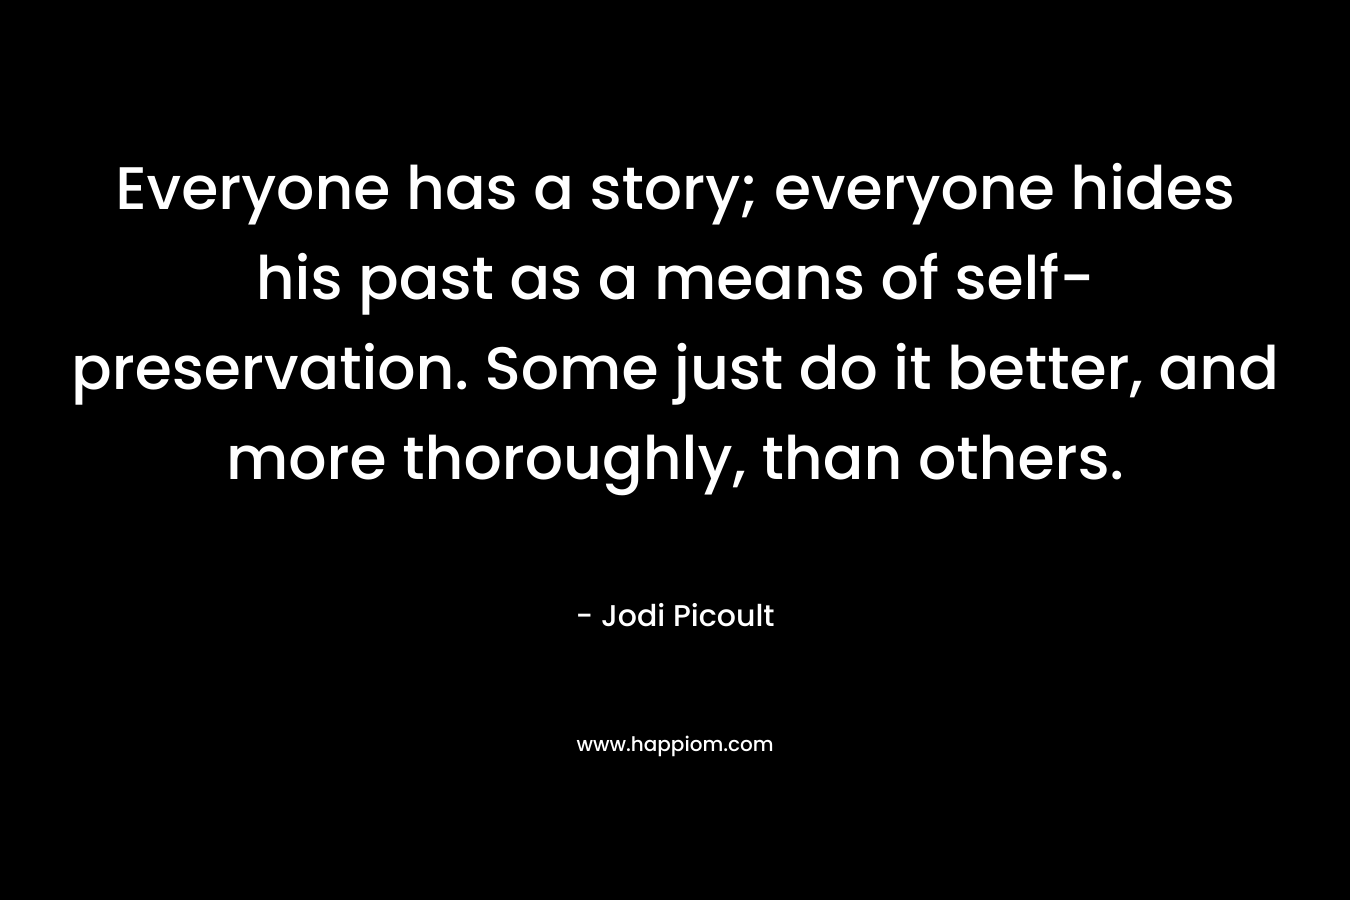 Everyone has a story; everyone hides his past as a means of self-preservation. Some just do it better, and more thoroughly, than others. – Jodi Picoult